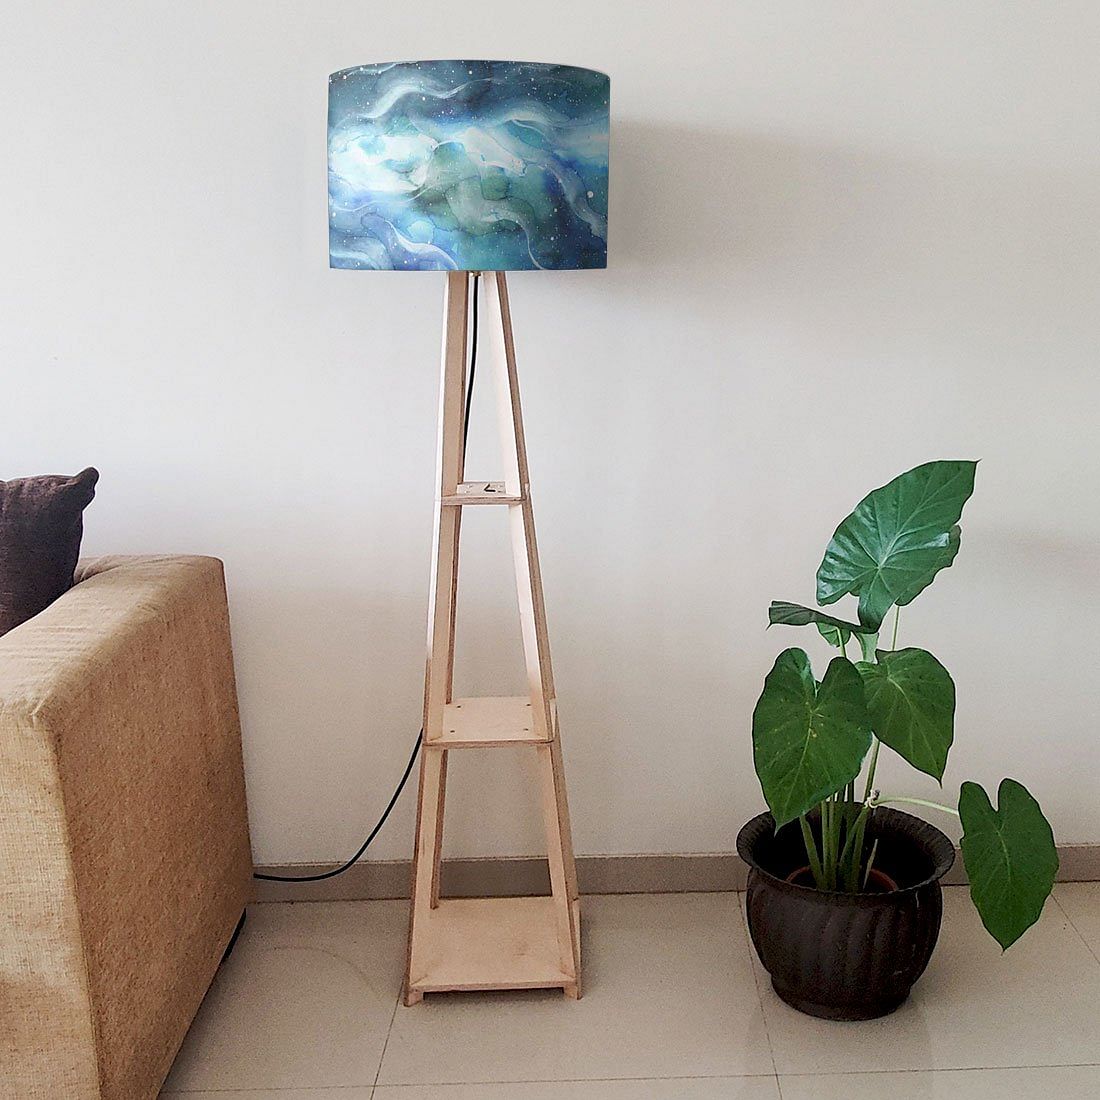 Wooden Floor Lamp Stand Only for Bedside Light - Space Nutcase